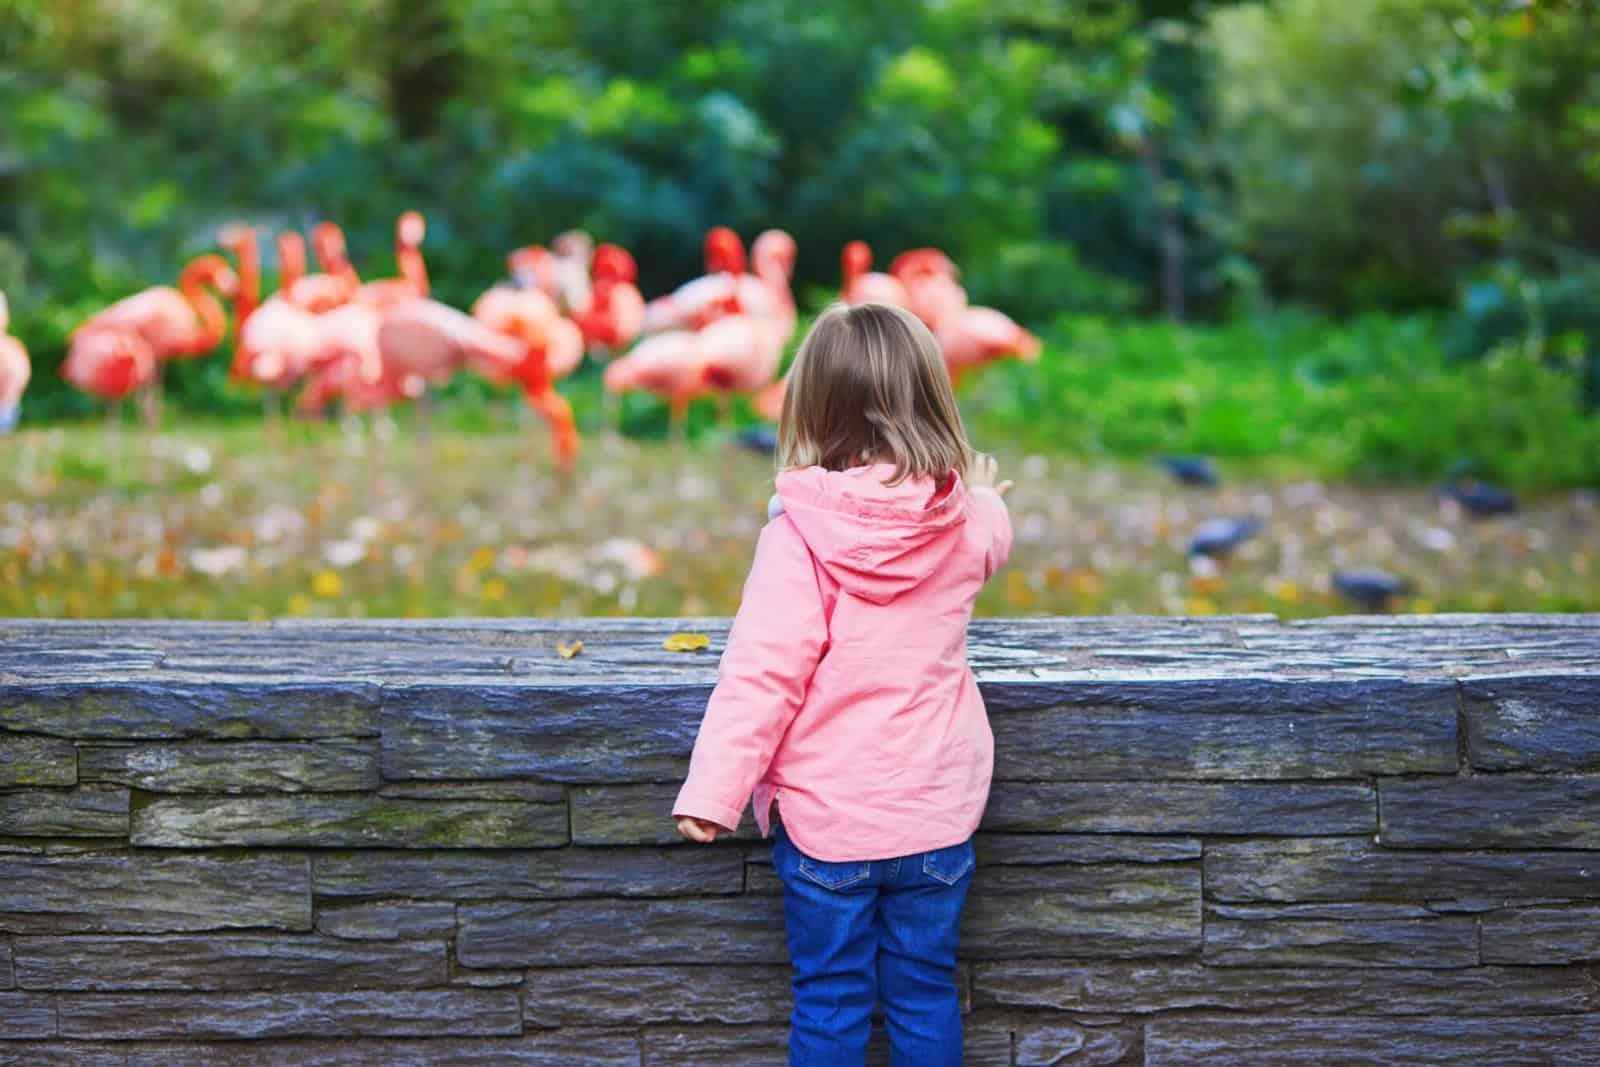 Flamingo at PAris Zoo with toddlers